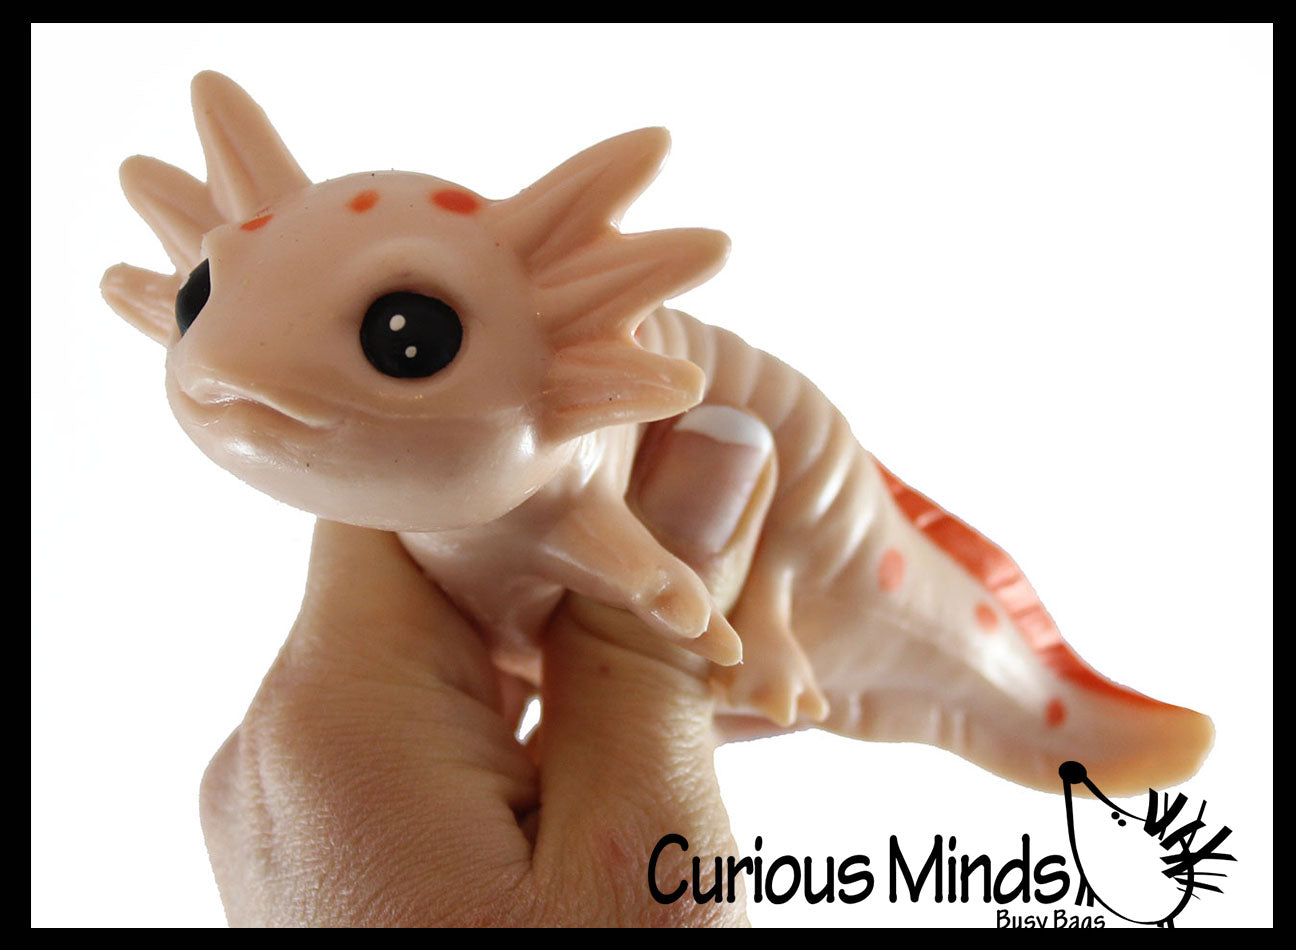 Axolotl Cute Sea Creatures Stretchy and Squeezy Toy - Crunchy Bead Filled - Fidget Stress Ball 1 Random Color